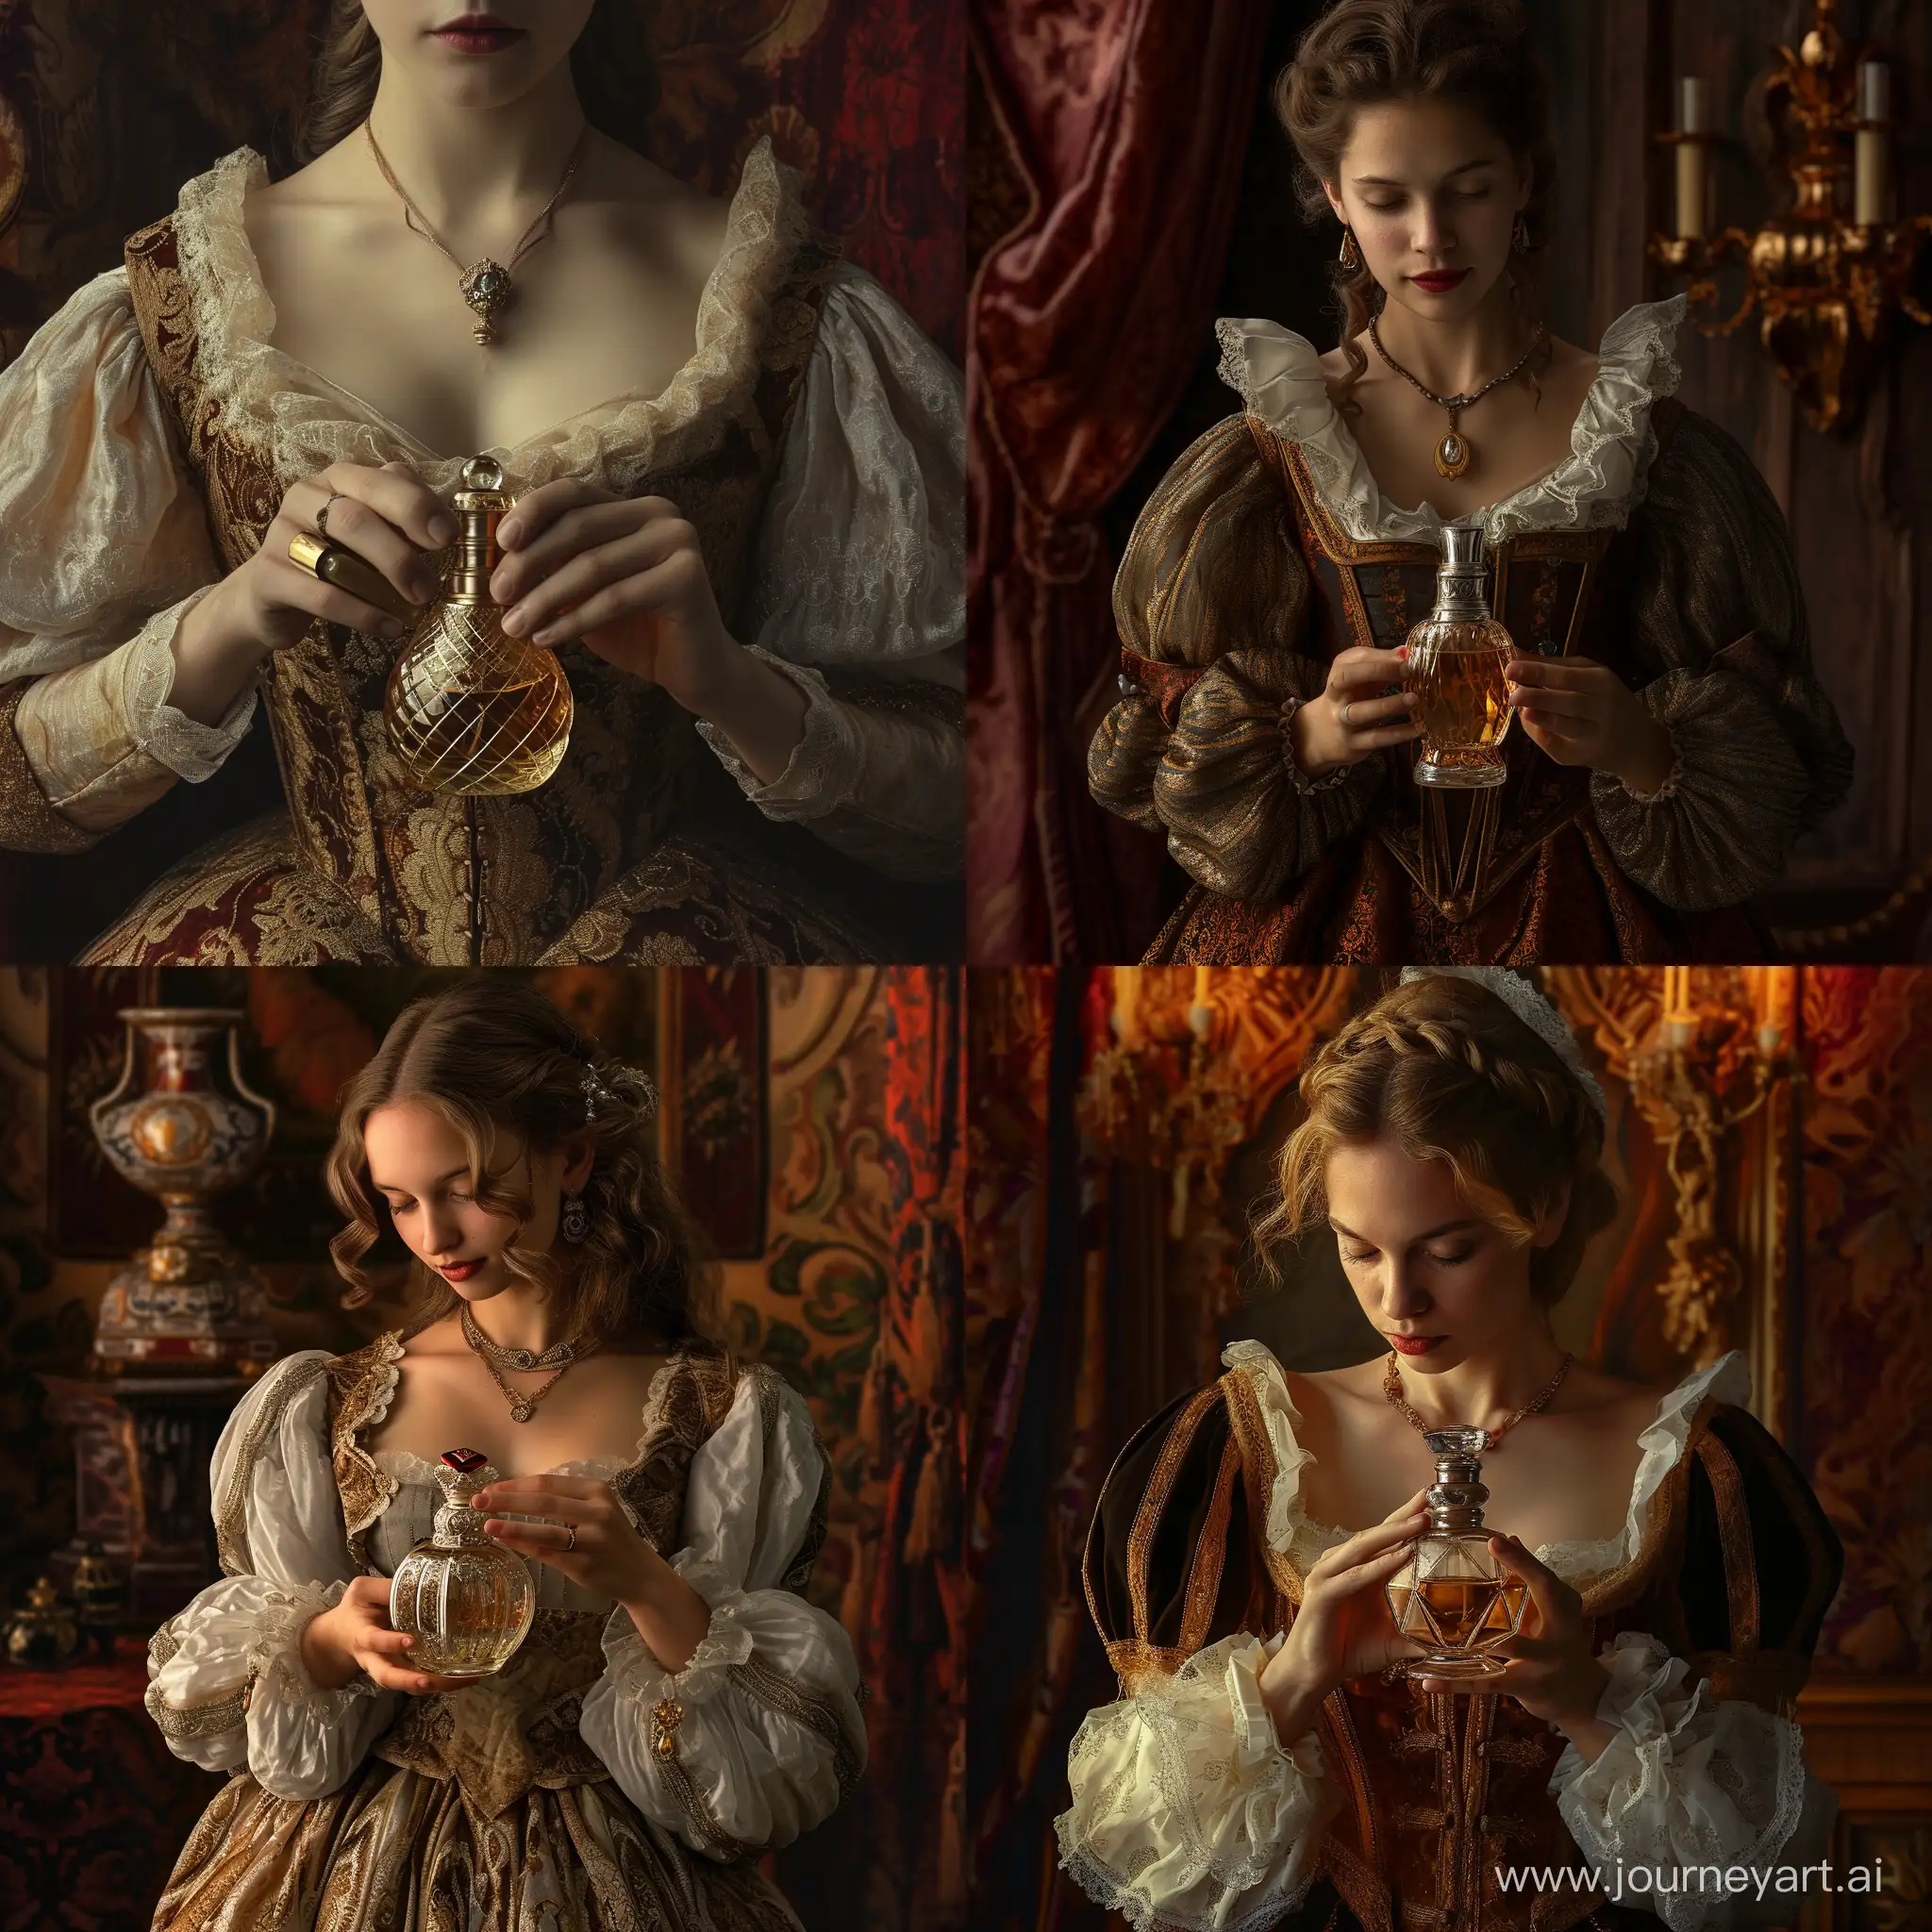 Rich-16th-Century-French-Courtesan-with-Exquisite-Perfume